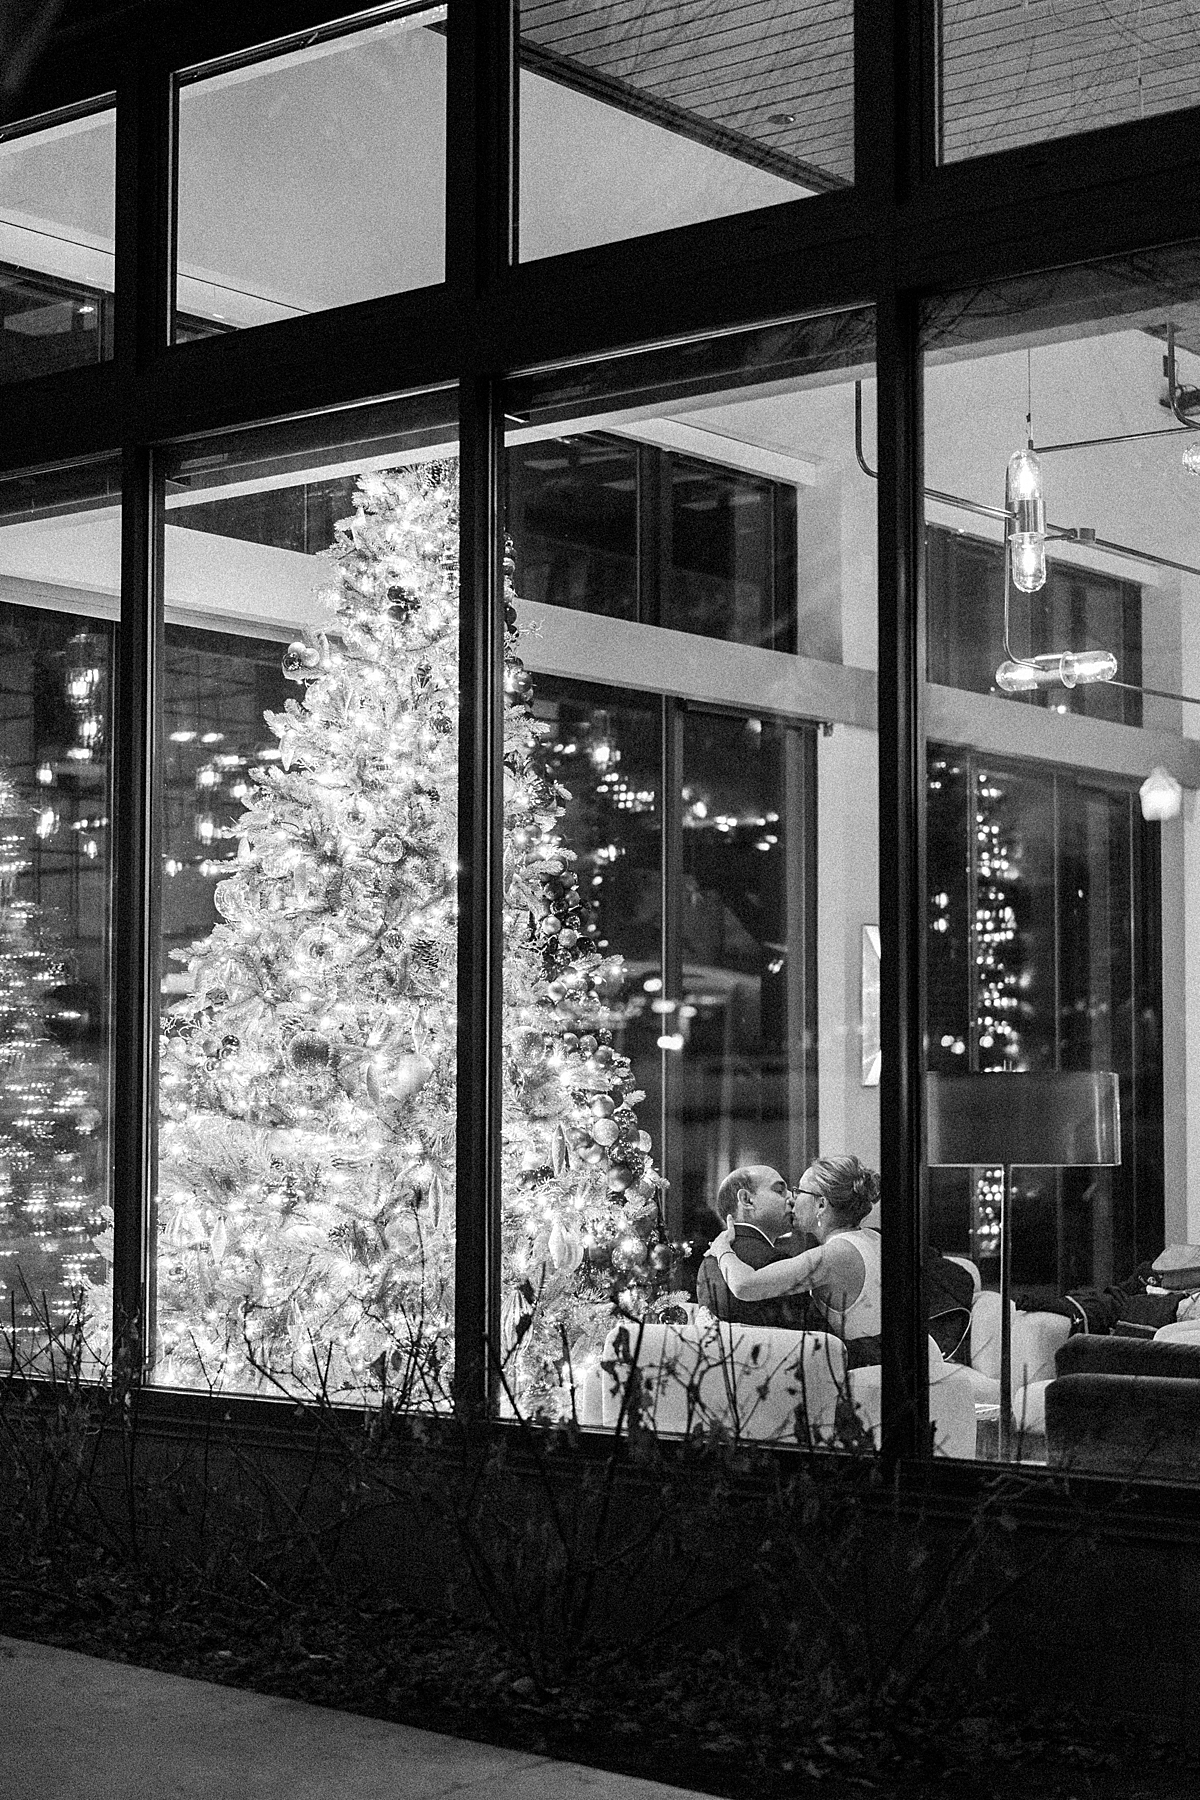 A newly eloped couple kiss by the Christmas tree at Limelight hotel in downtown Aspen, as capture on camera from outside the hotel.